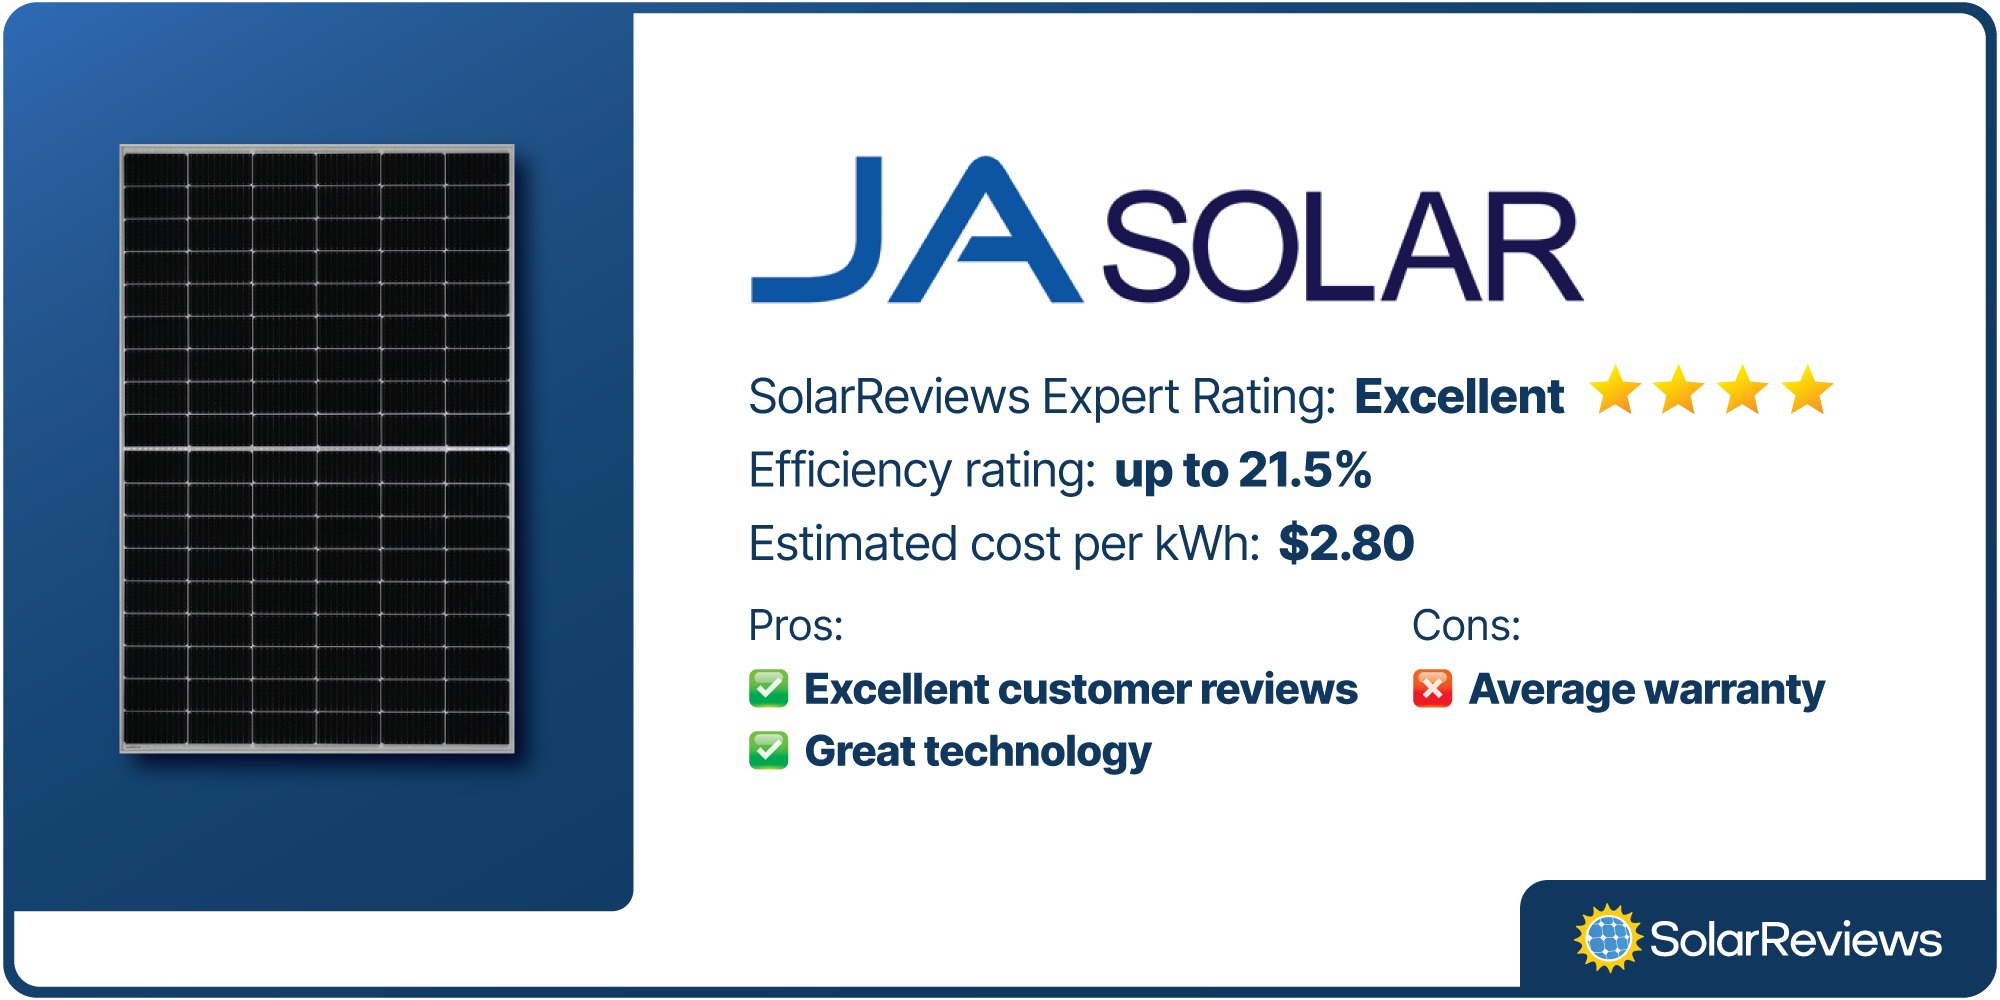 Number 4 on our cheap solar panel list is JA Solar. This panel has an Excellent rating from our SolarReviews' experts and an efficiency rating up to 21.5%. This panel costs about $2.80 per kWh.